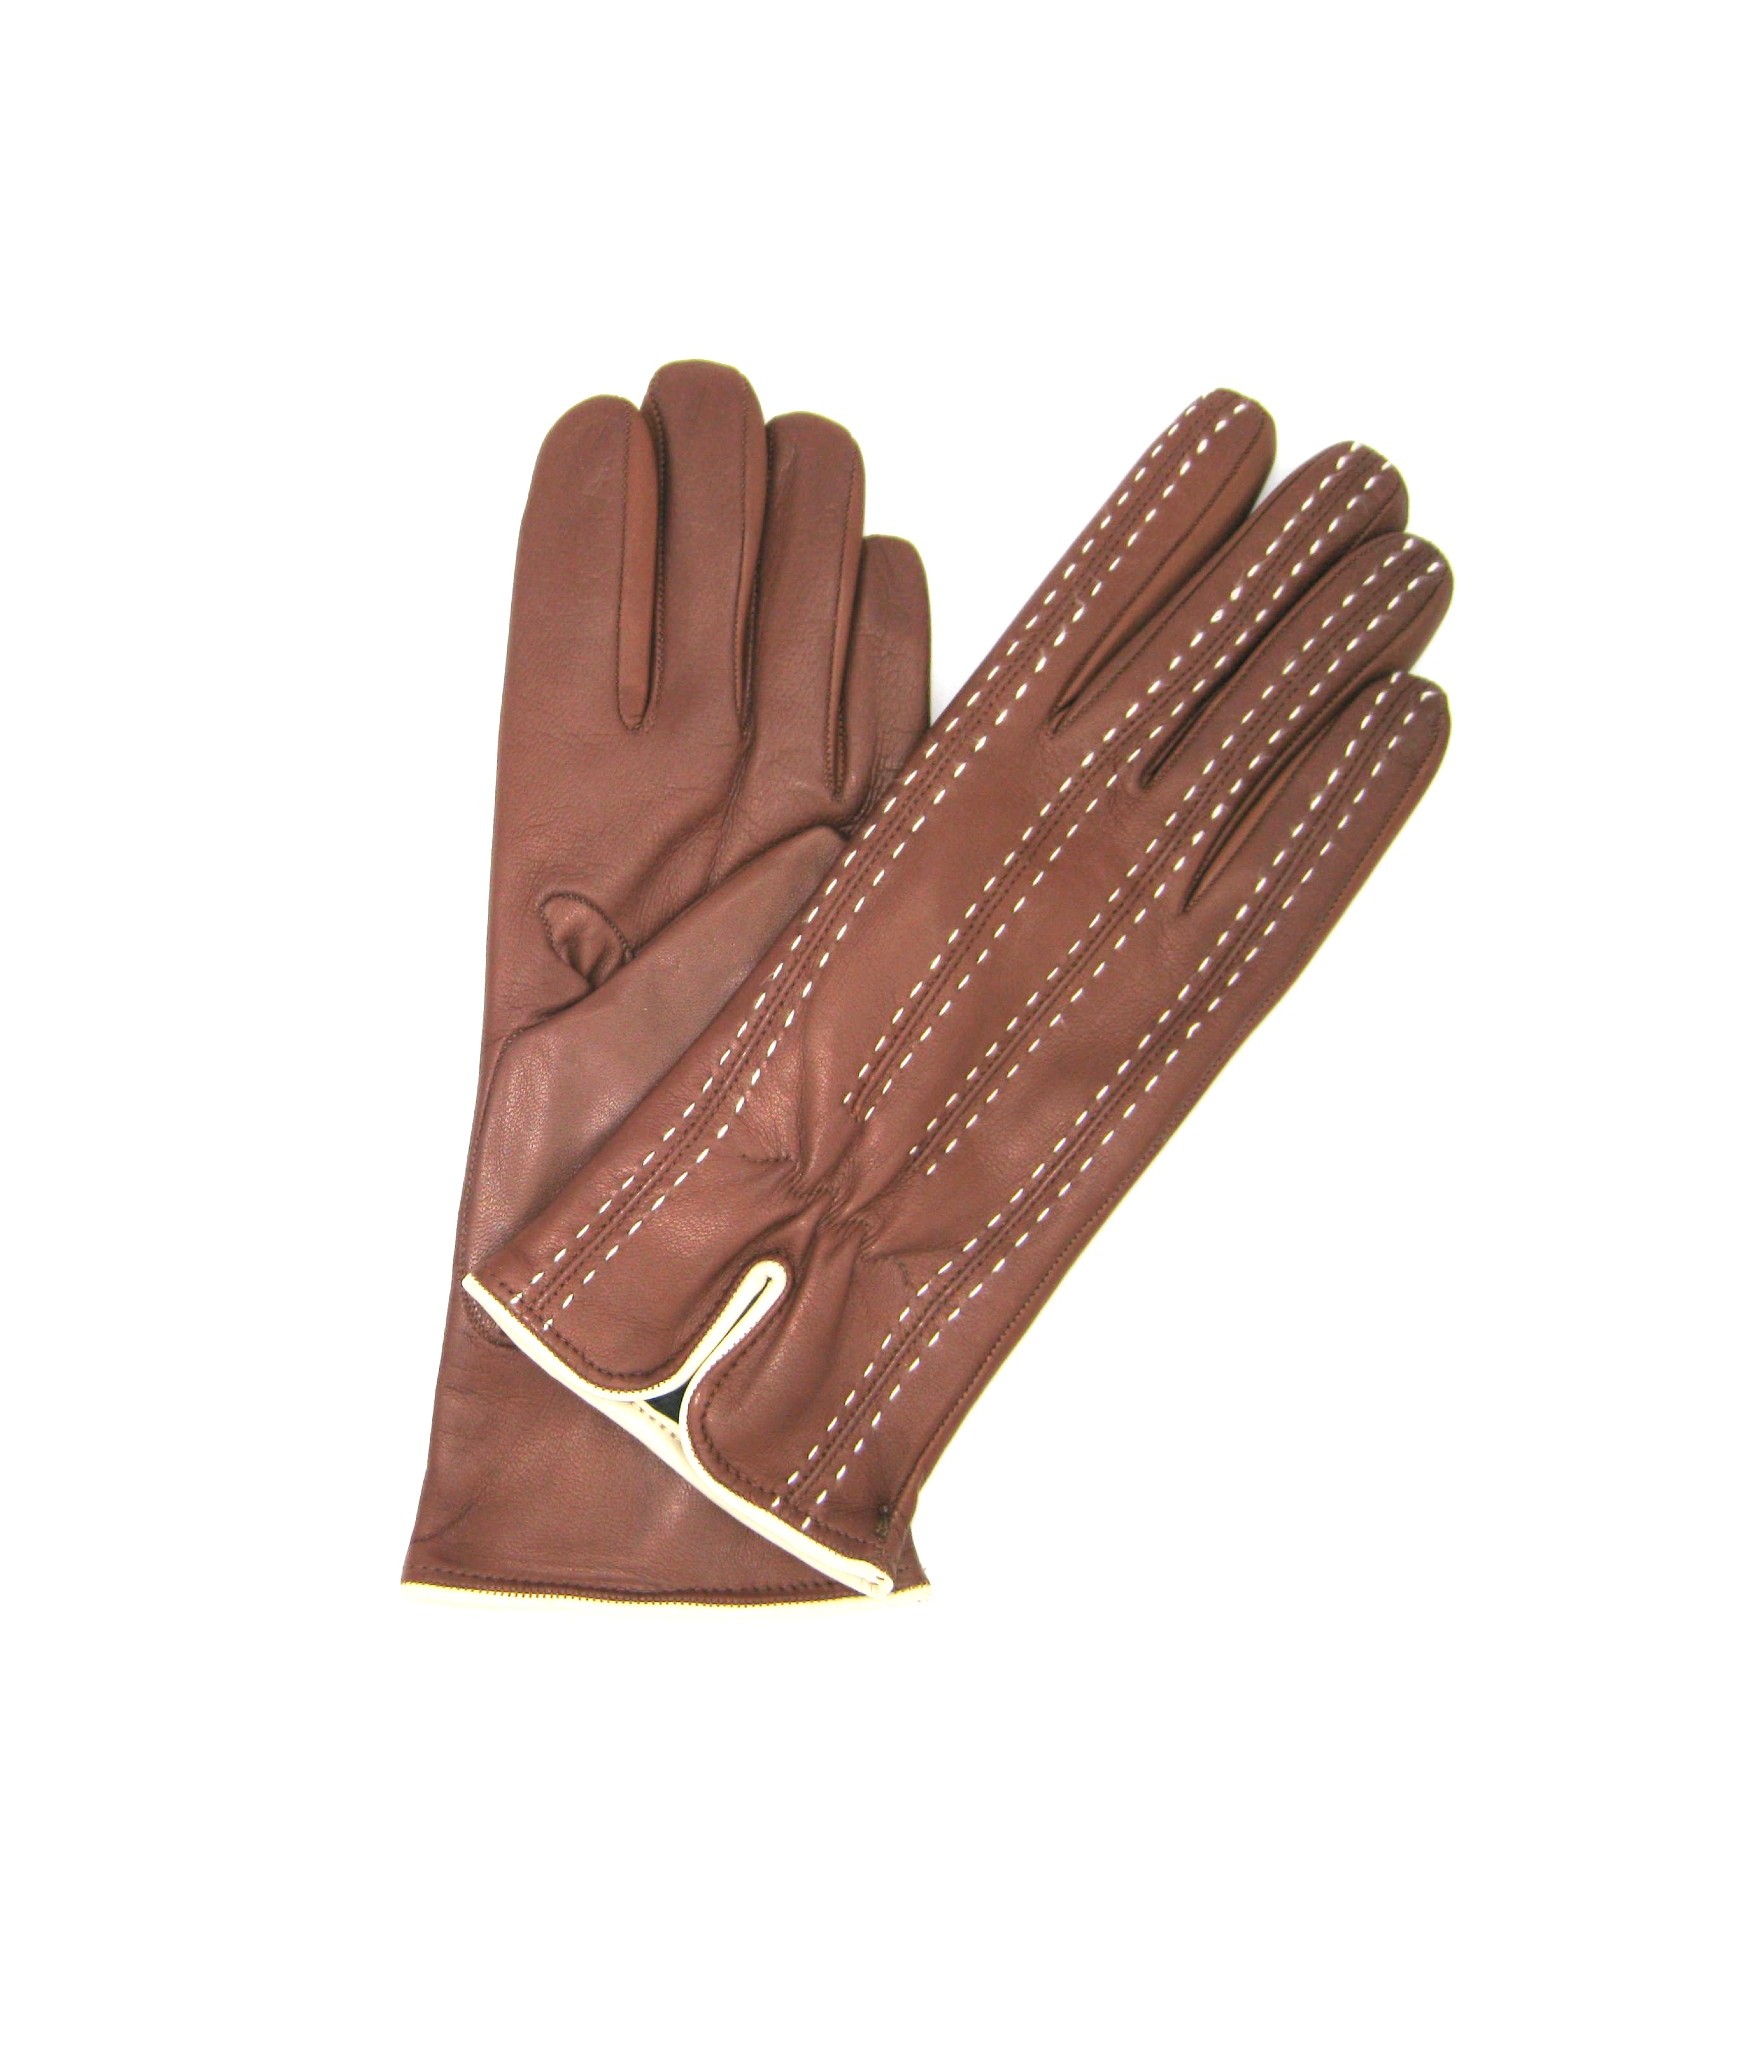 Nappa leather gloves with contrast stitching  Tan/Cream